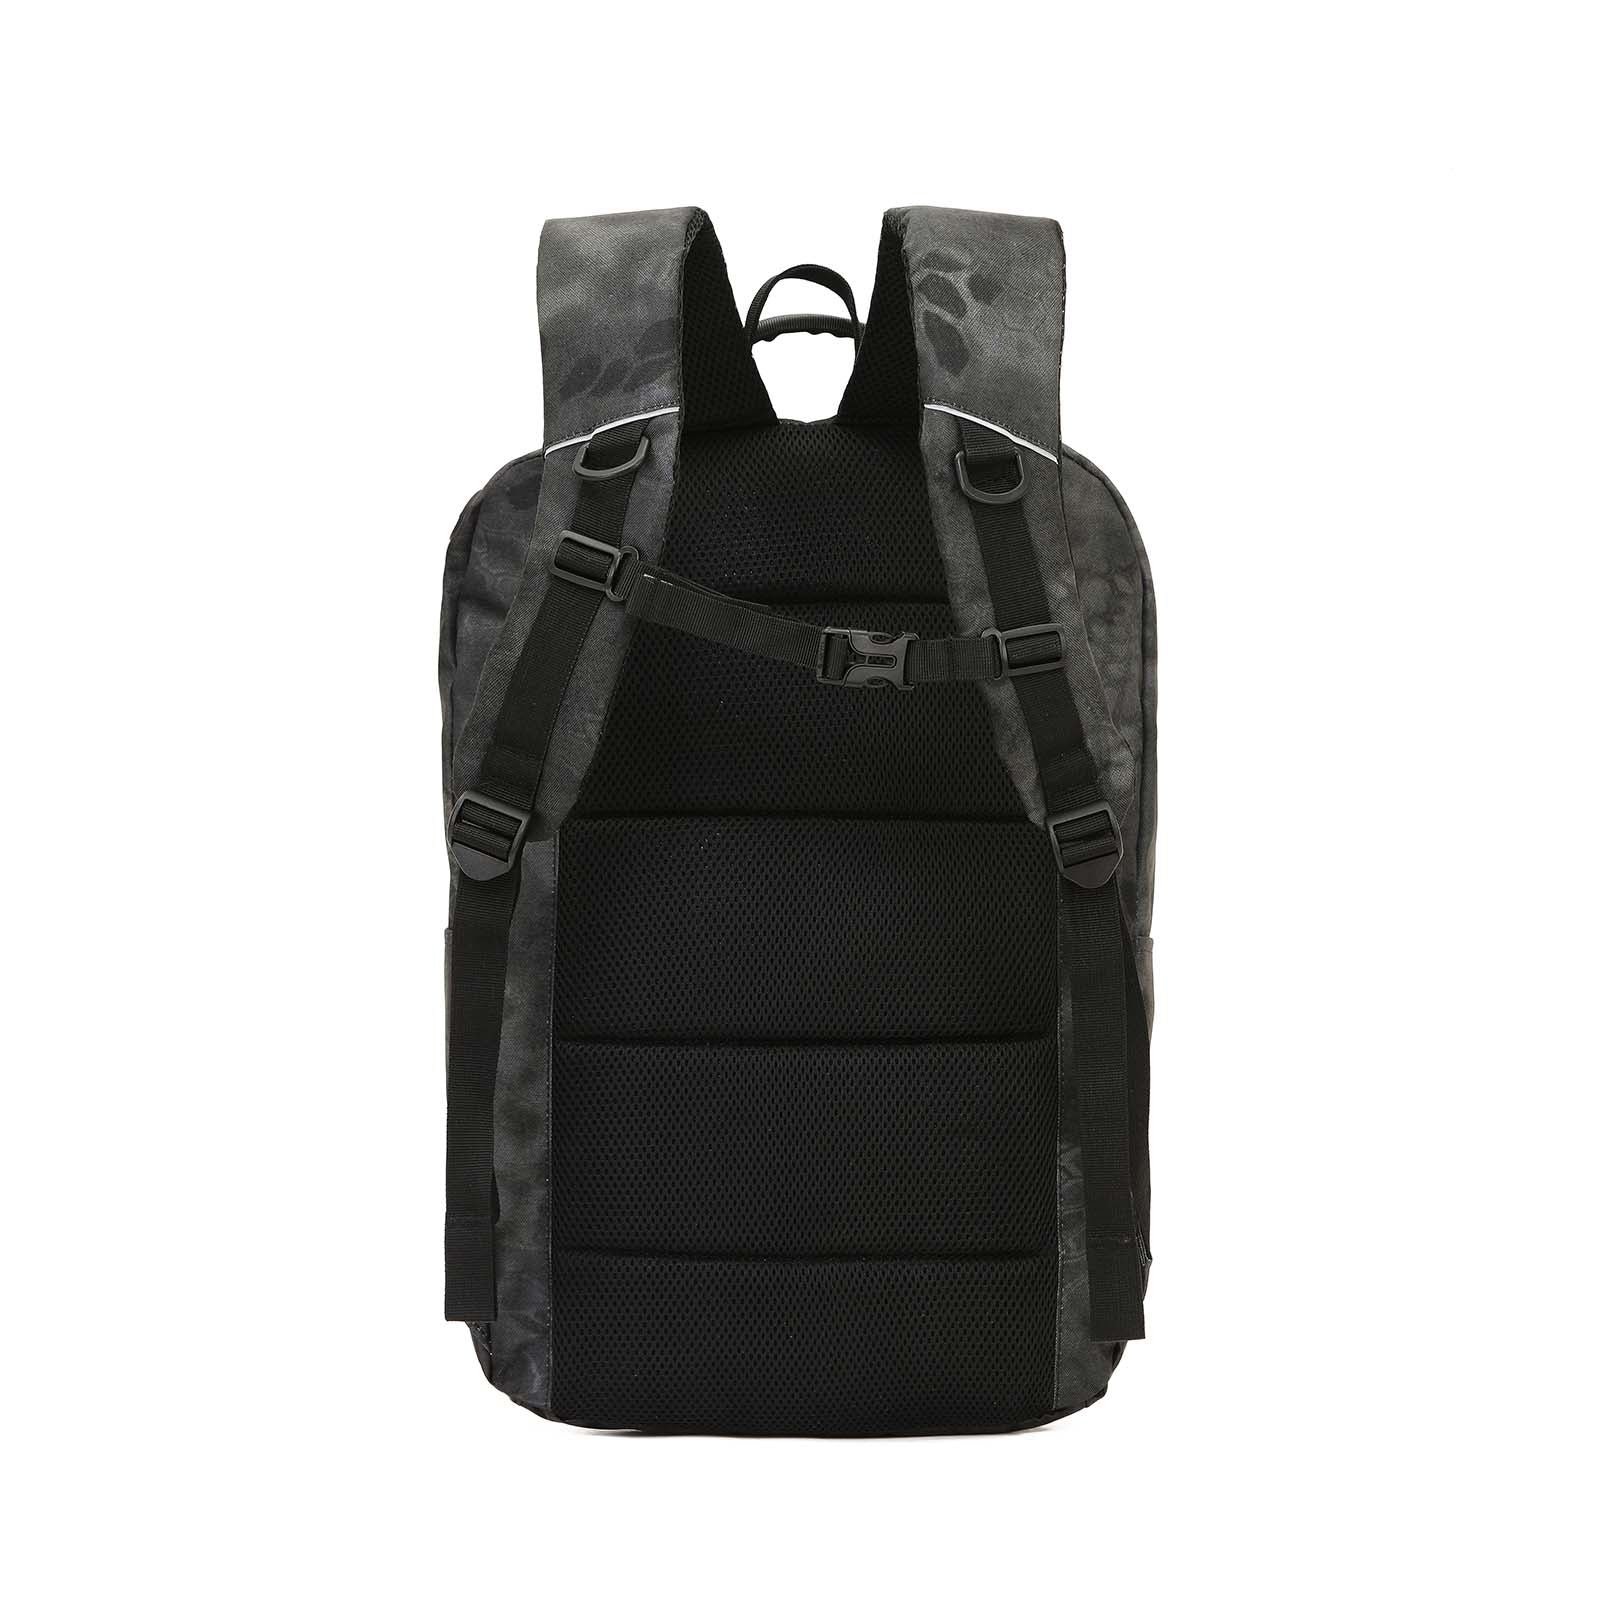 tosca-laptop-compartment-backpack-35l-grey-camo-front